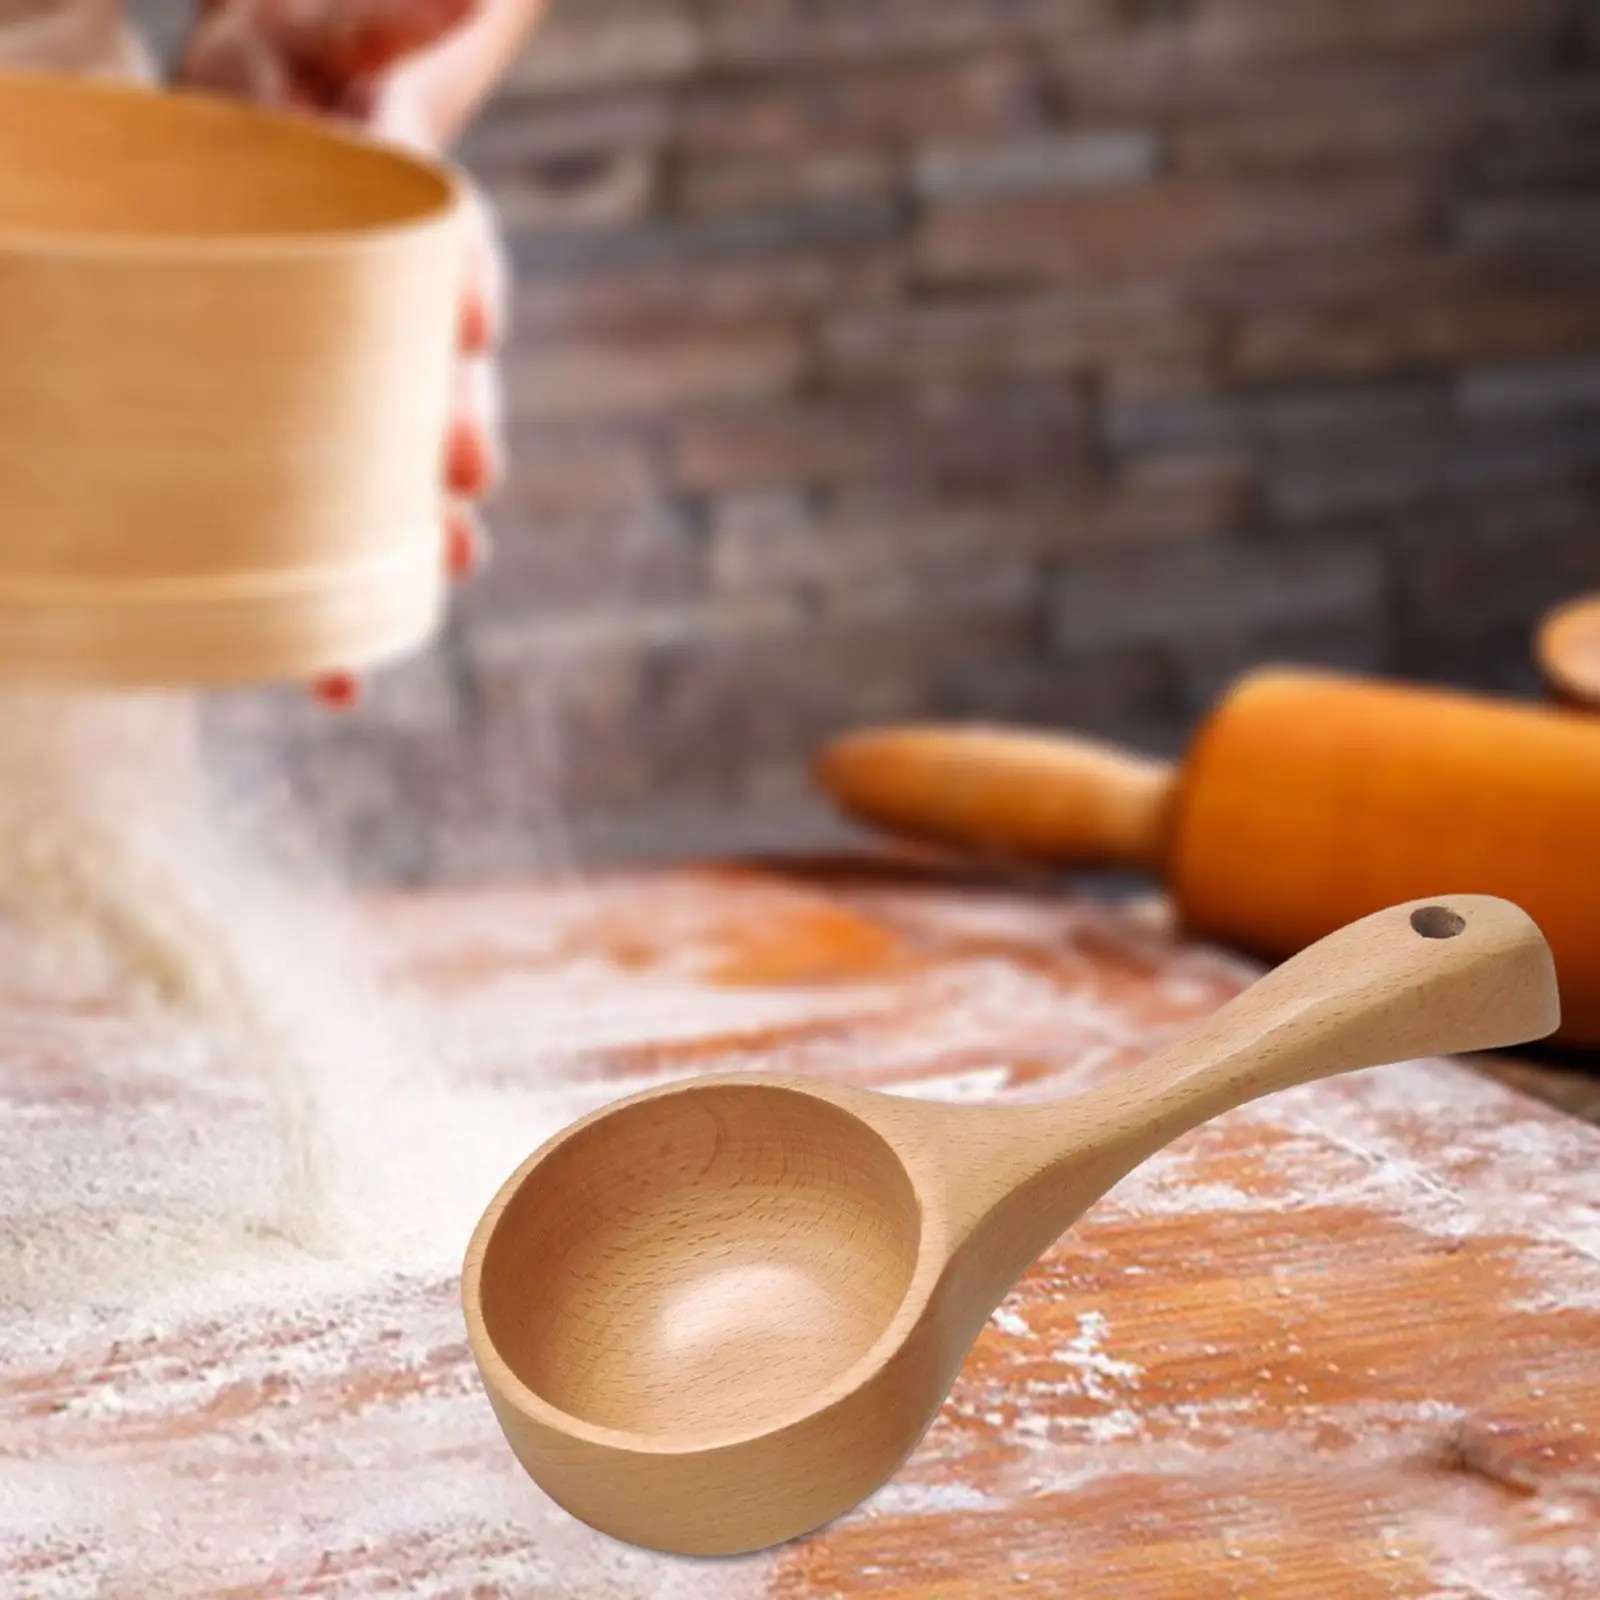 Serving Soup Tablespoon Handmade Kitchen Utensil Tableware Wooden Ladle Spoon Water Spoon for Canisters Flour Rice Porridge